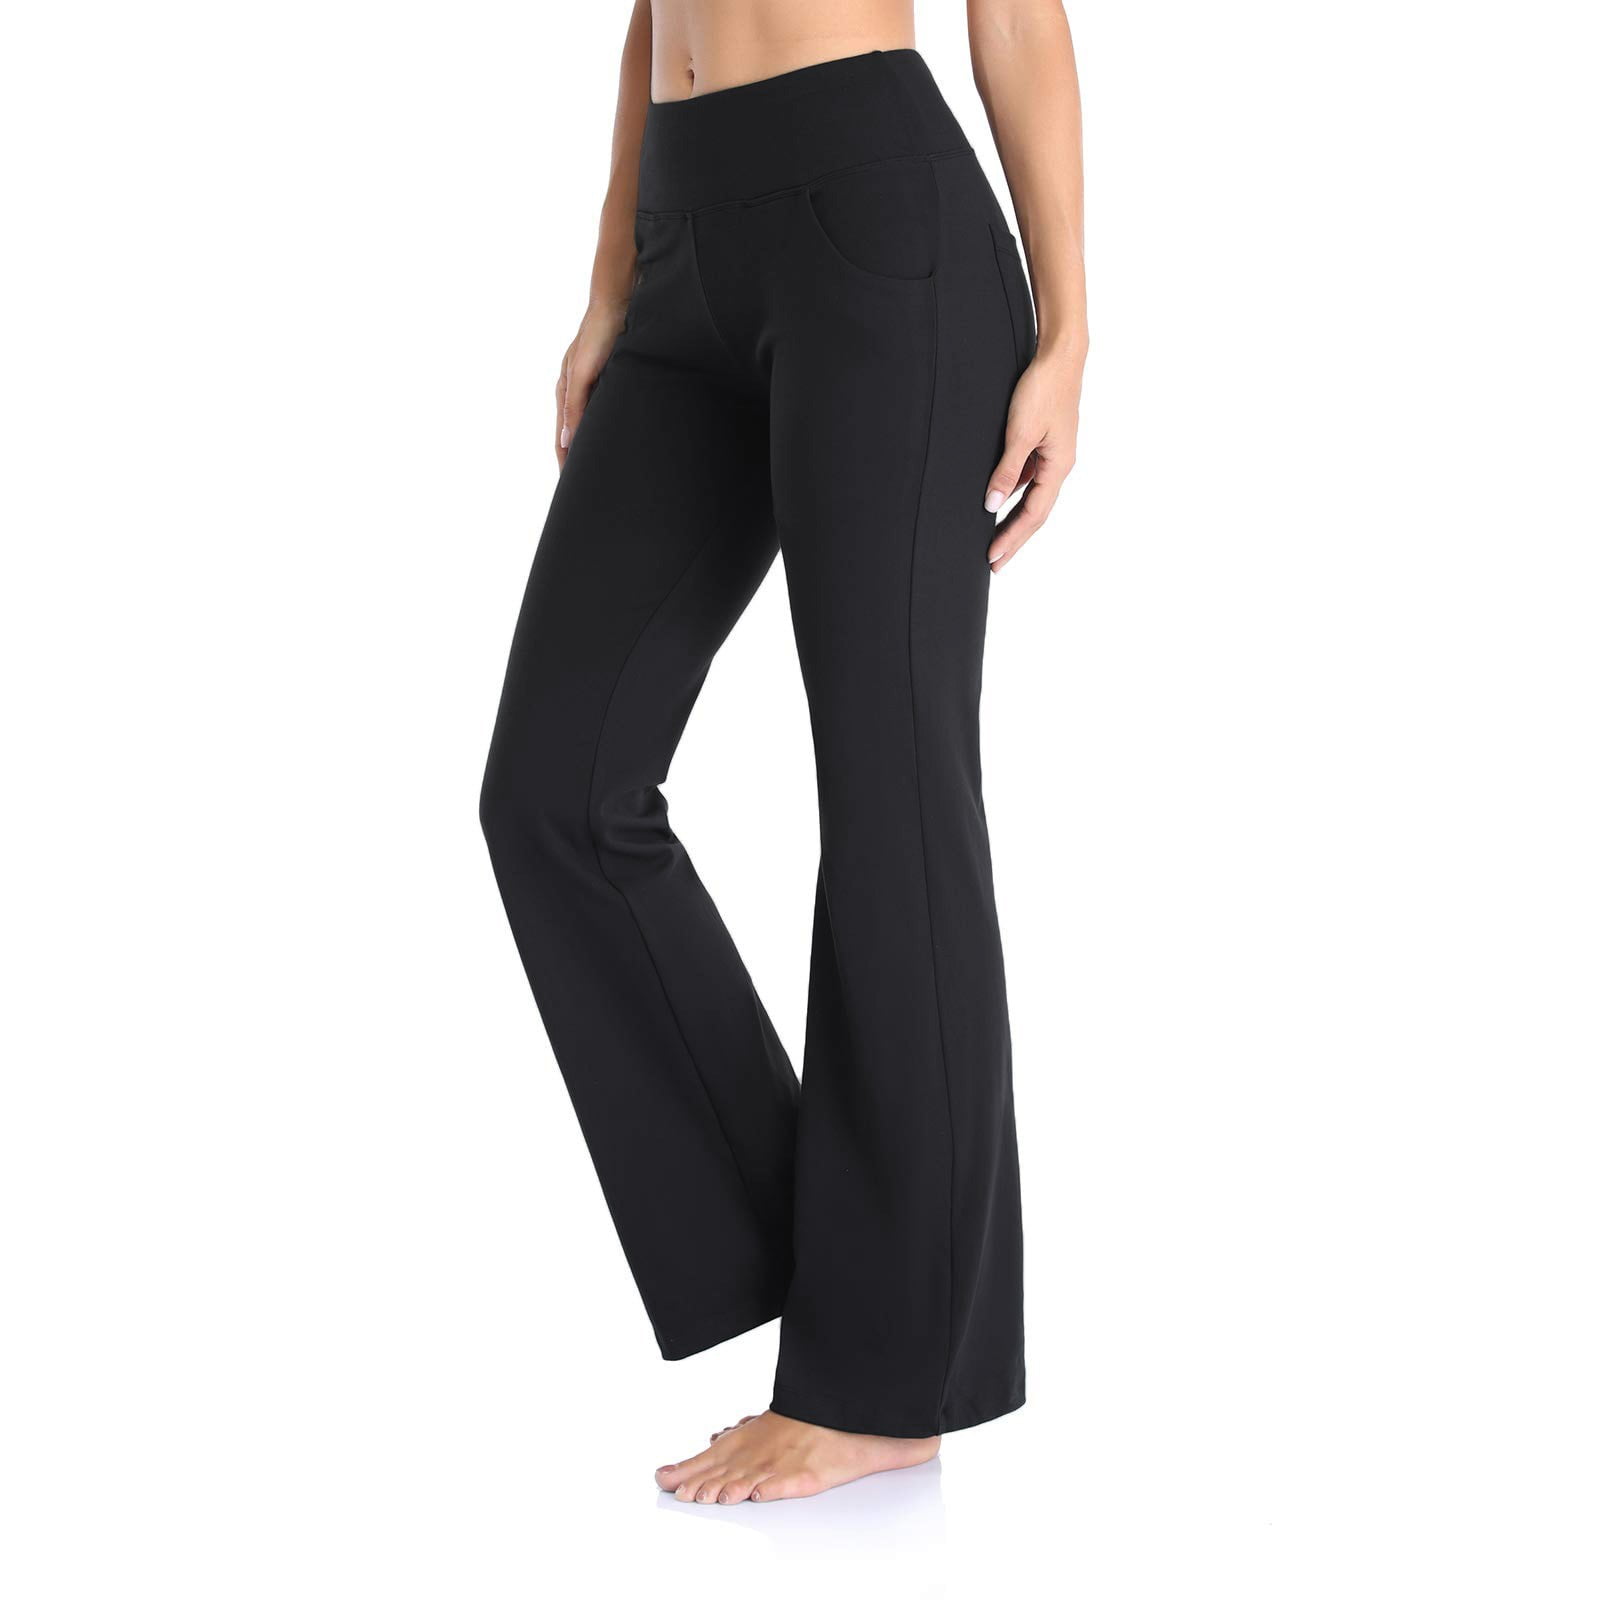 YUUAND Pants for Women Clearance Basic Wide Fitness Pants Flare Yoga ...